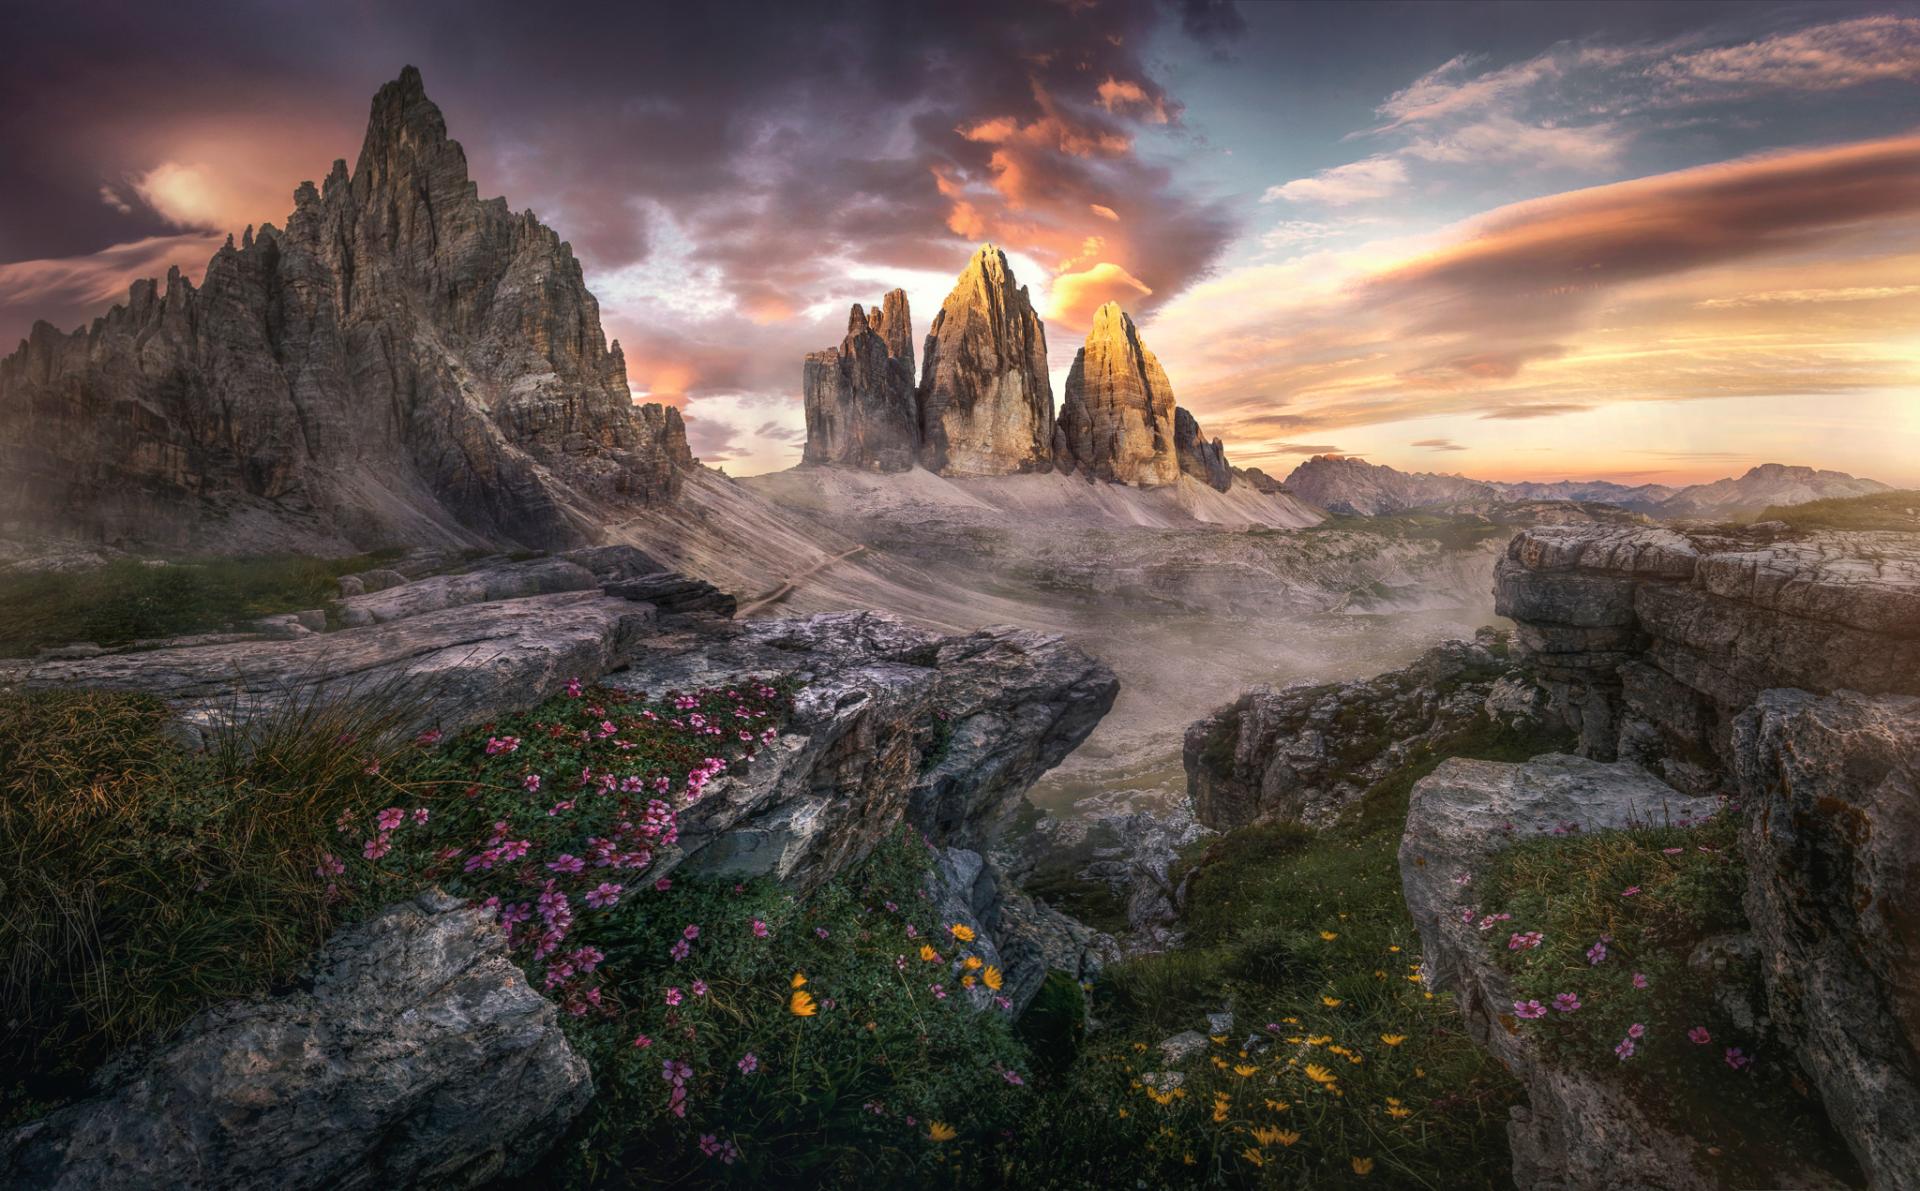 New York Photography Awards Winner - Mountains of the World